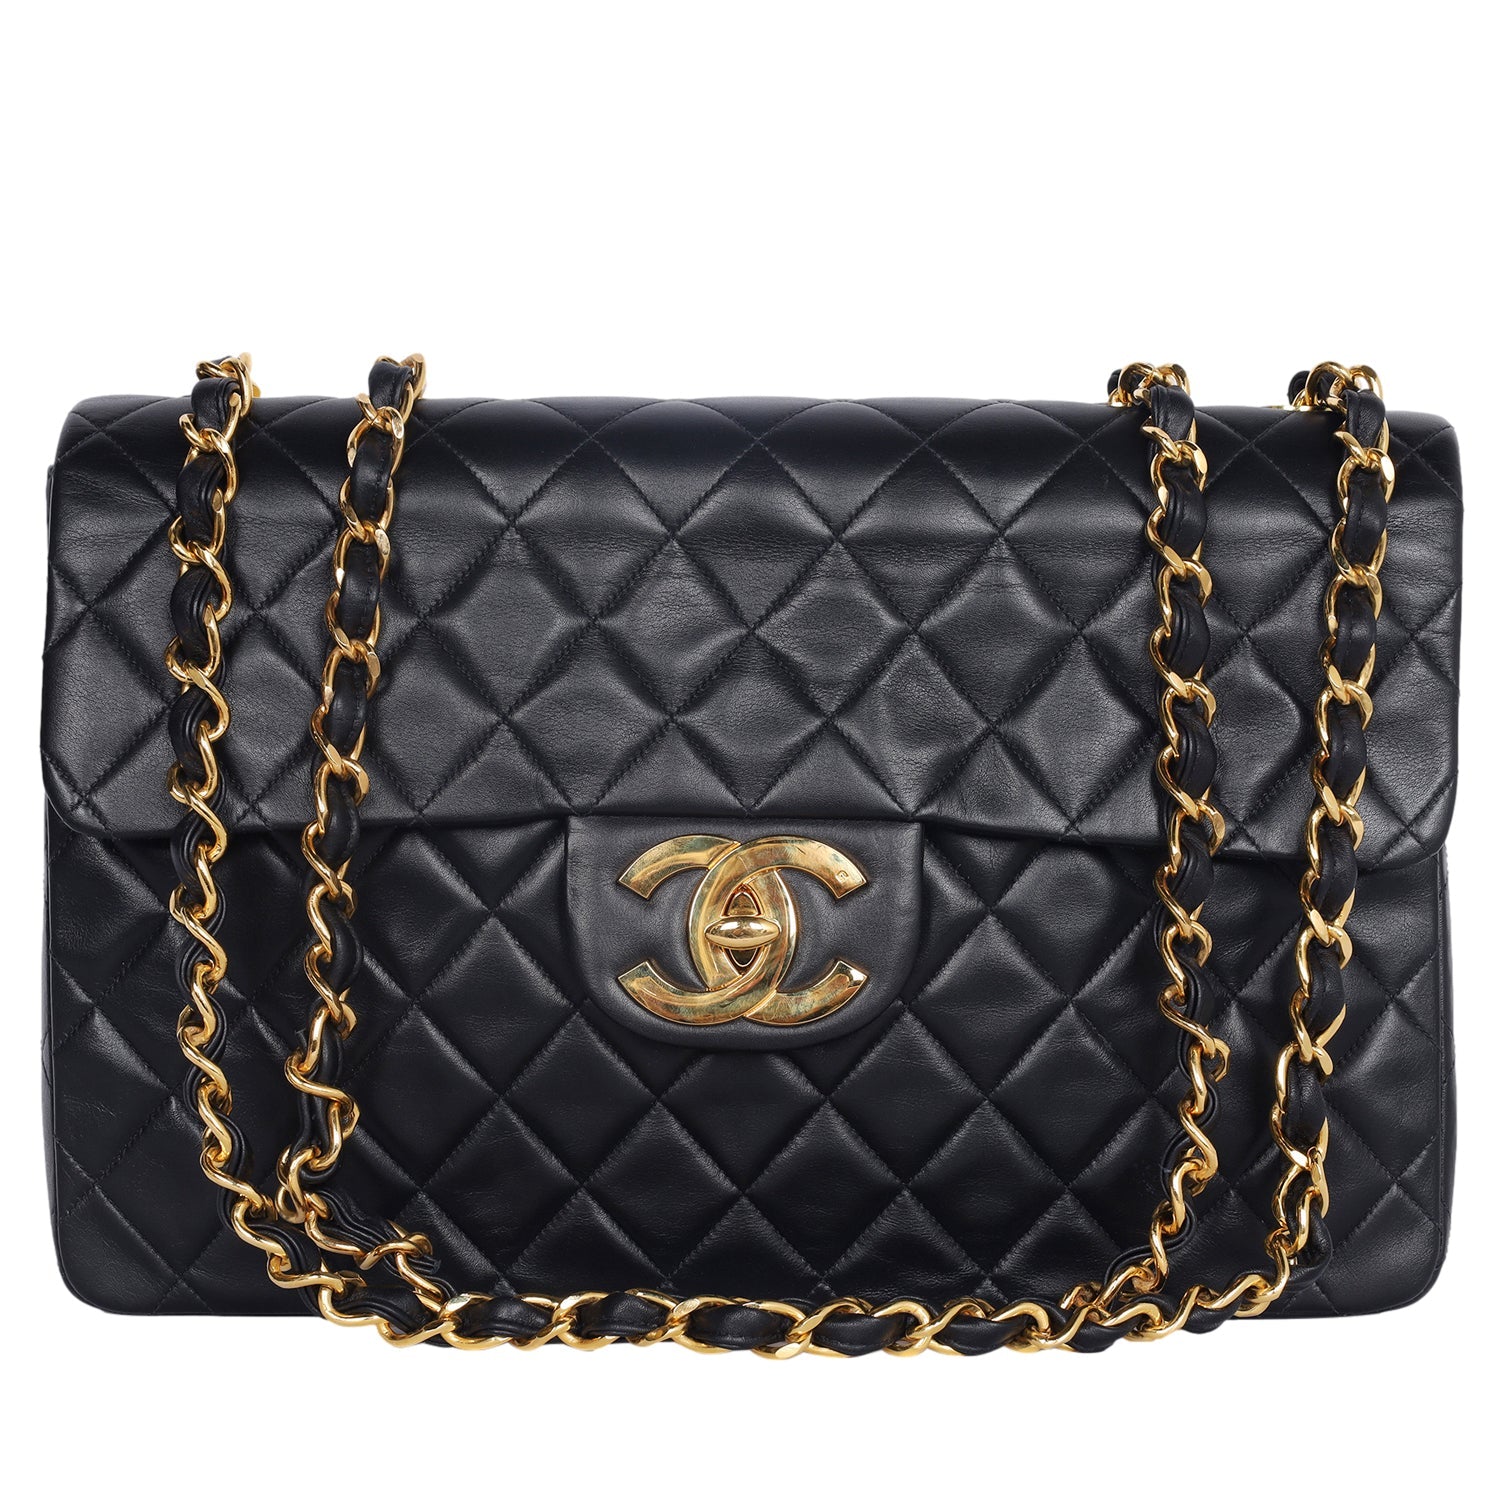 Timeless/classique leather crossbody bag Chanel Black in Leather - 35606707